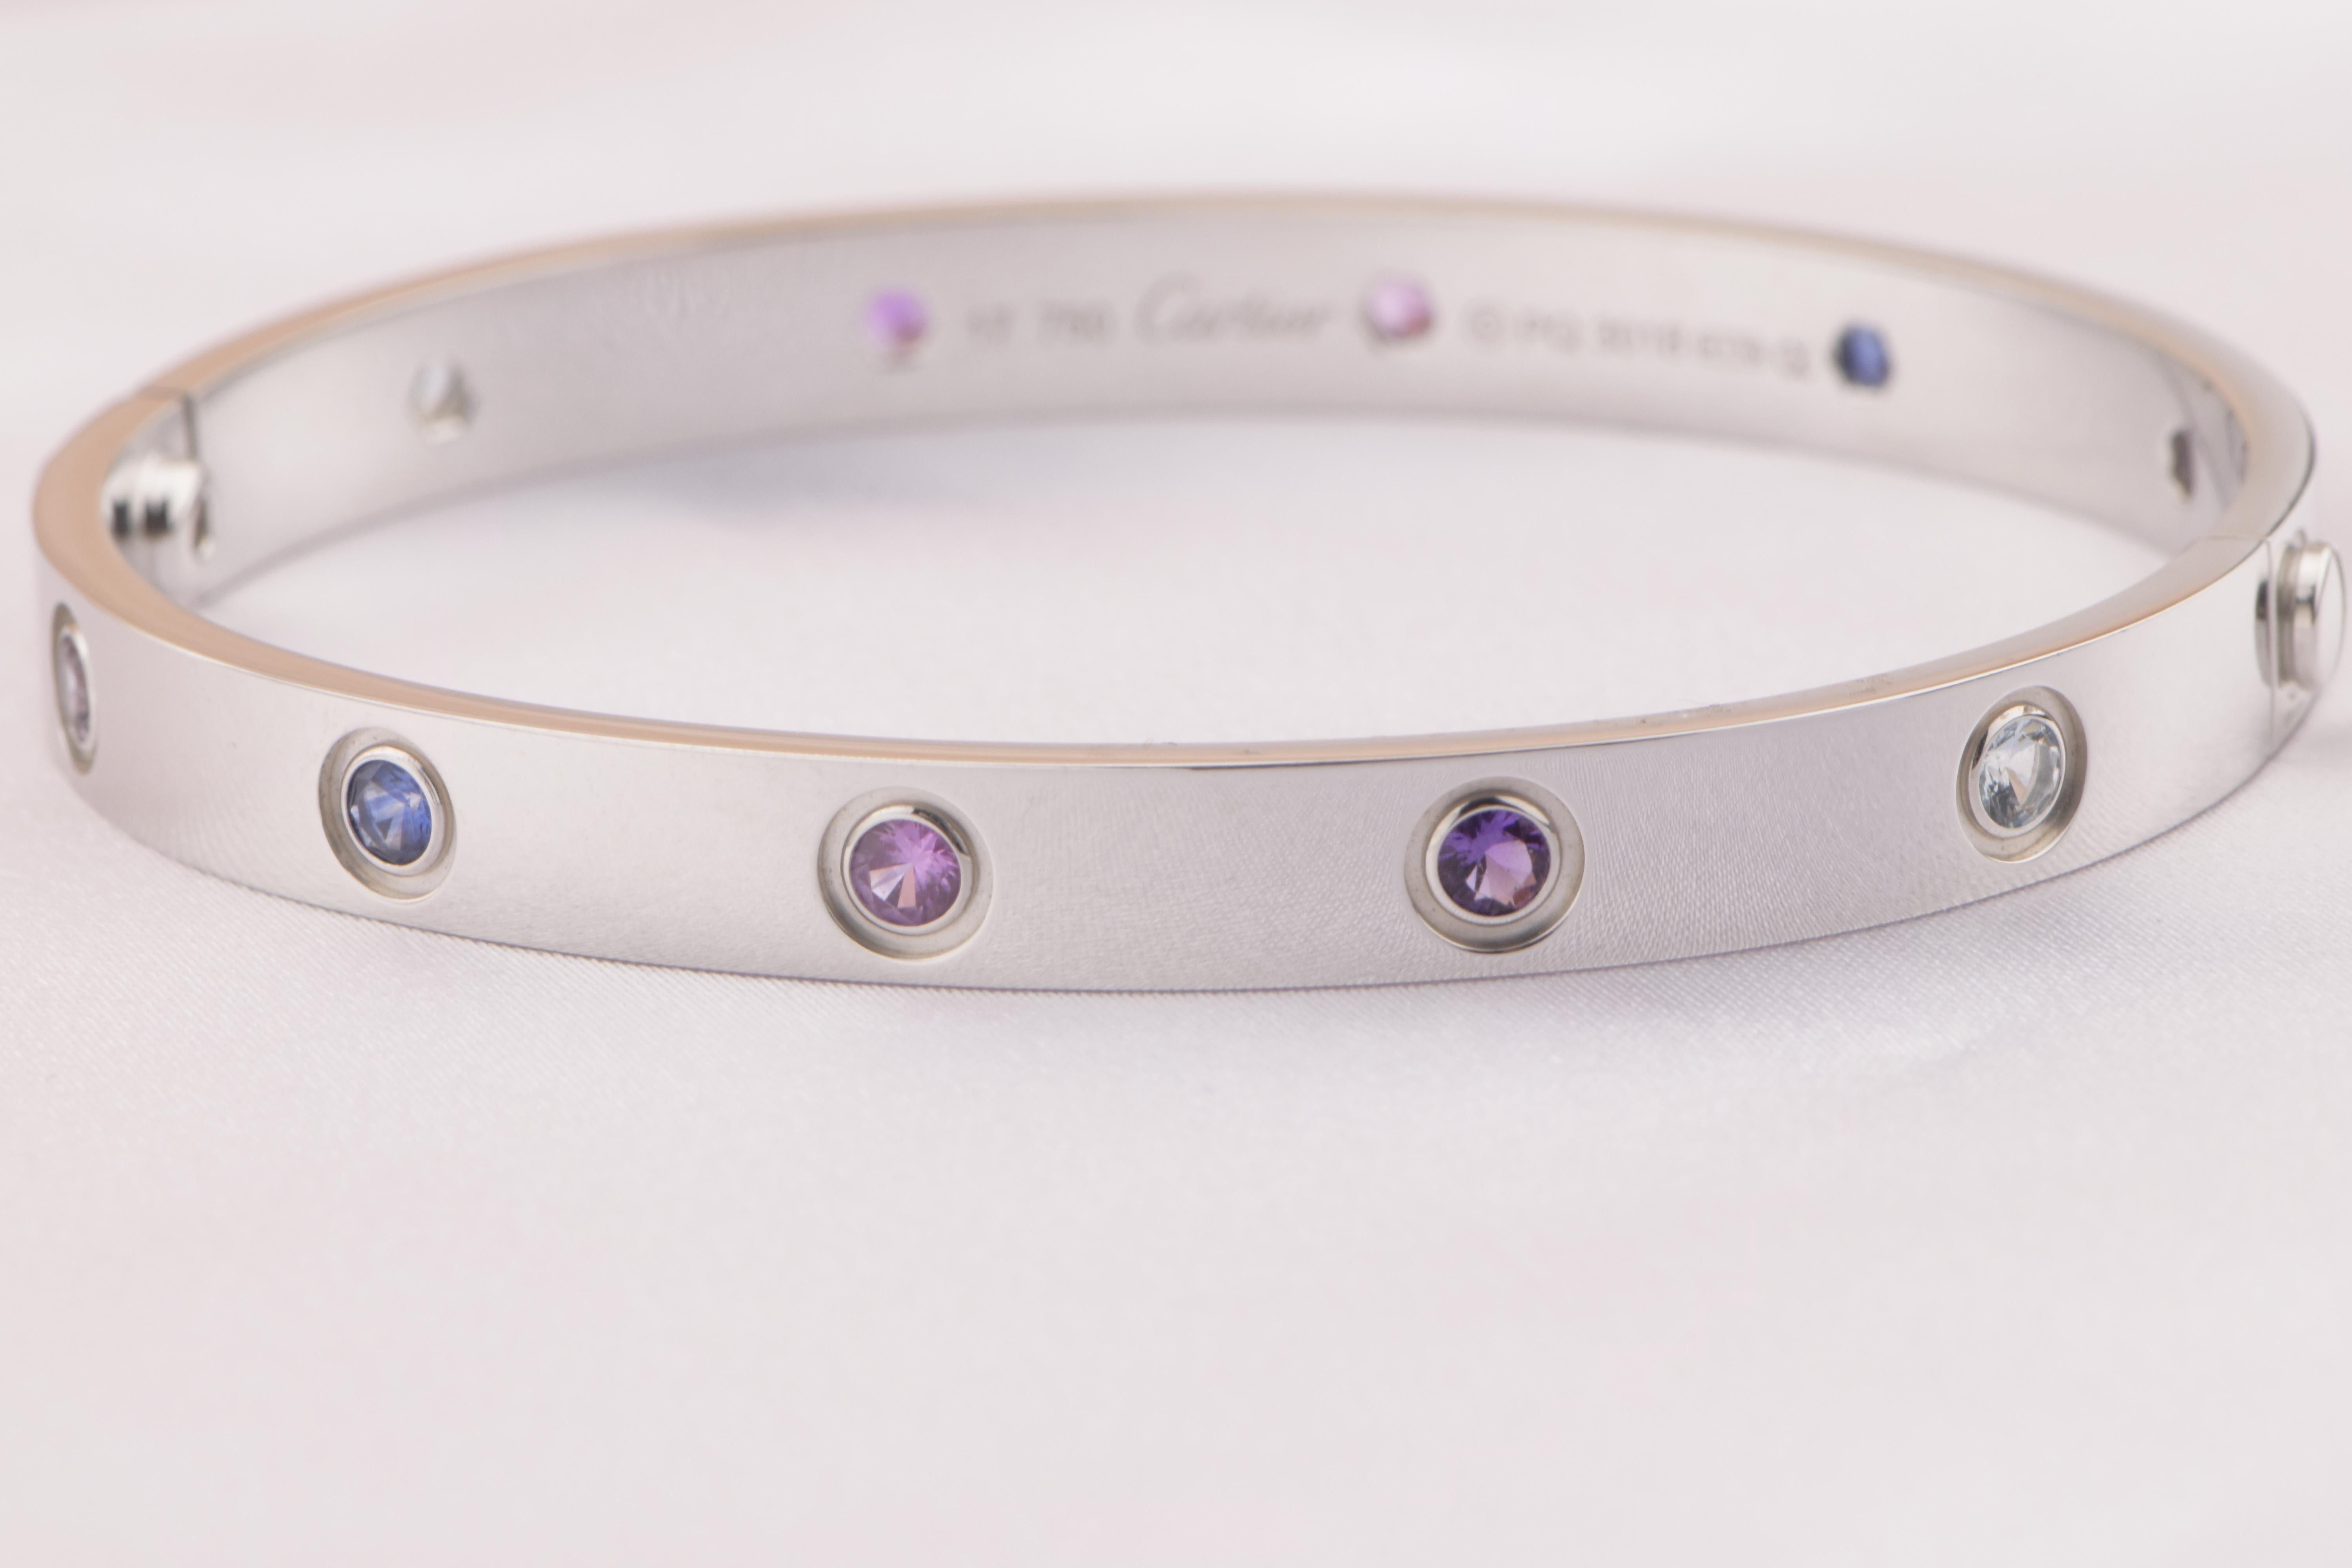 LOVE bracelet, 18K white gold, set with 2 aquamarines, 2 pink sapphires, 2 blue sapphires, 2 purple spinels, and 2 amethysts. Size 16
____________________________________________________

Dandelion Antiques Code:  AT-0976
Brand:  Cartier
Model: 